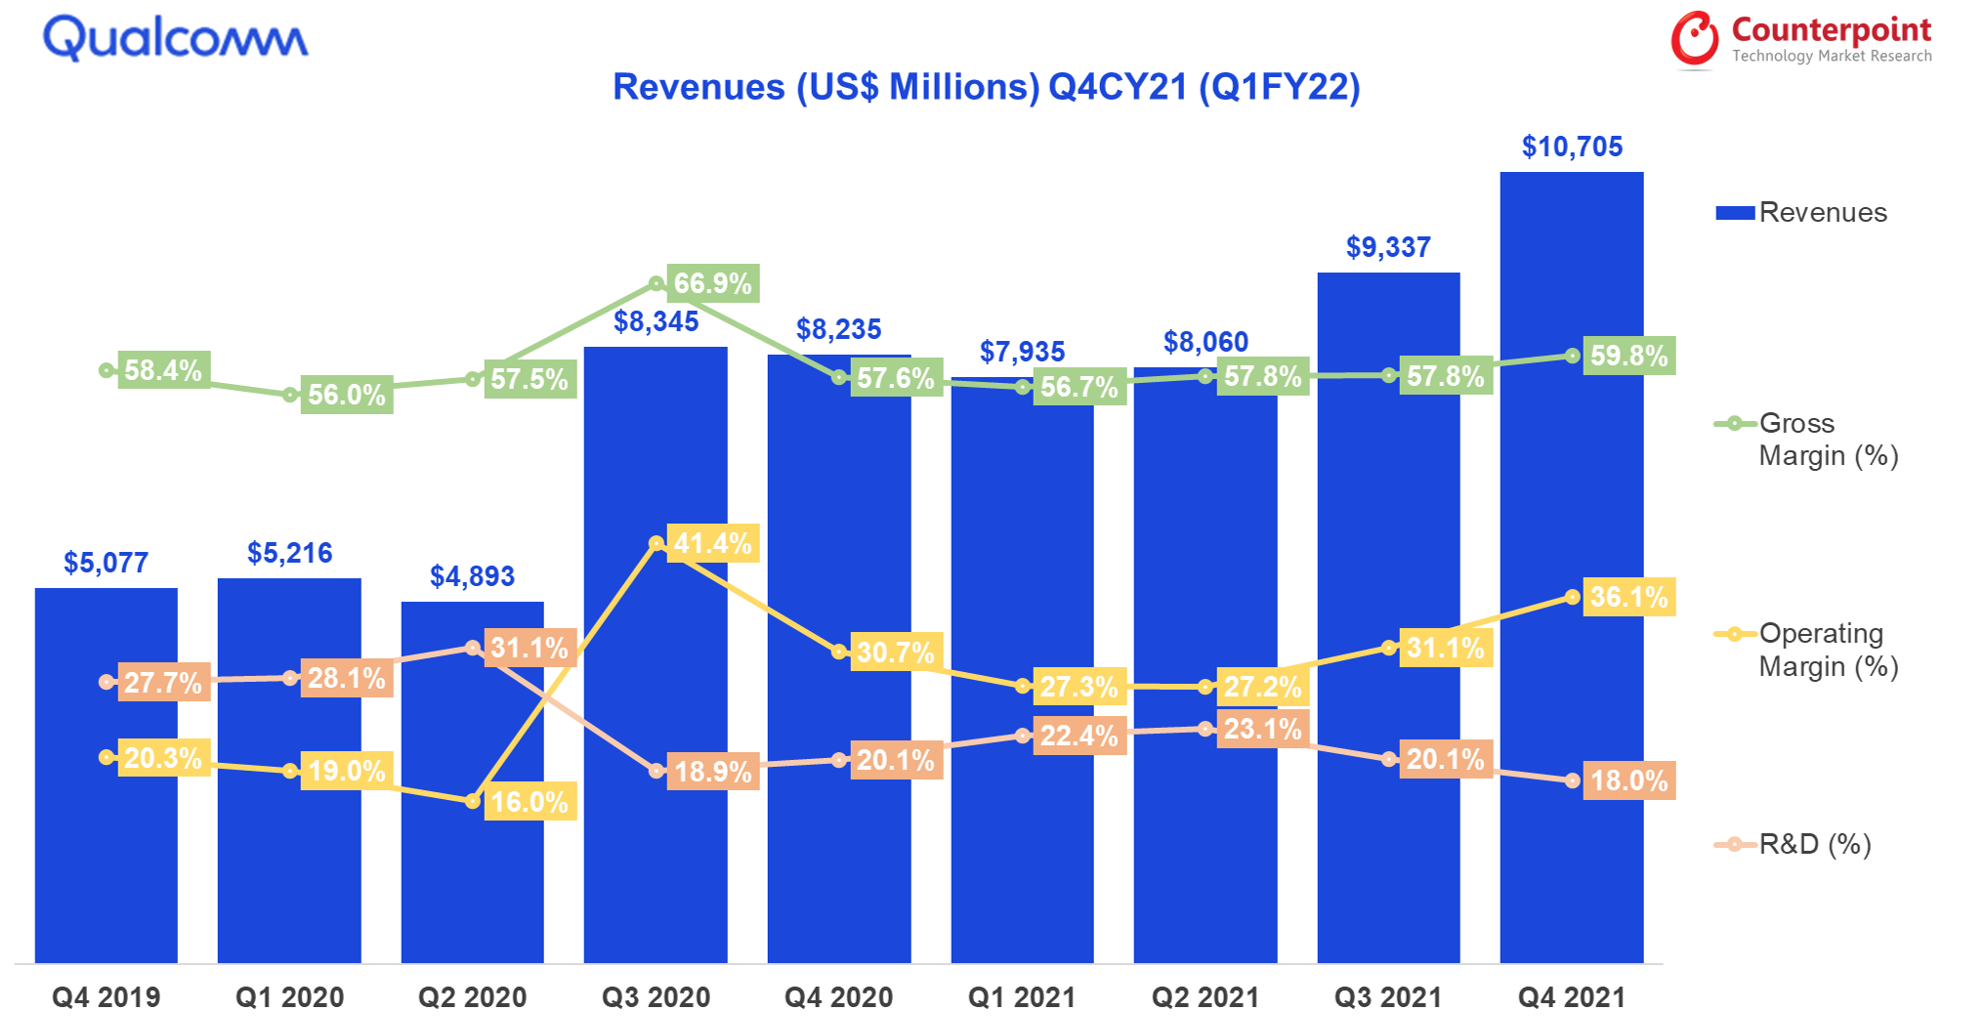 Counterpoint Research - Q4 2021 (FY Q1 2022) - Qualcomm Revenues Performance Analysis